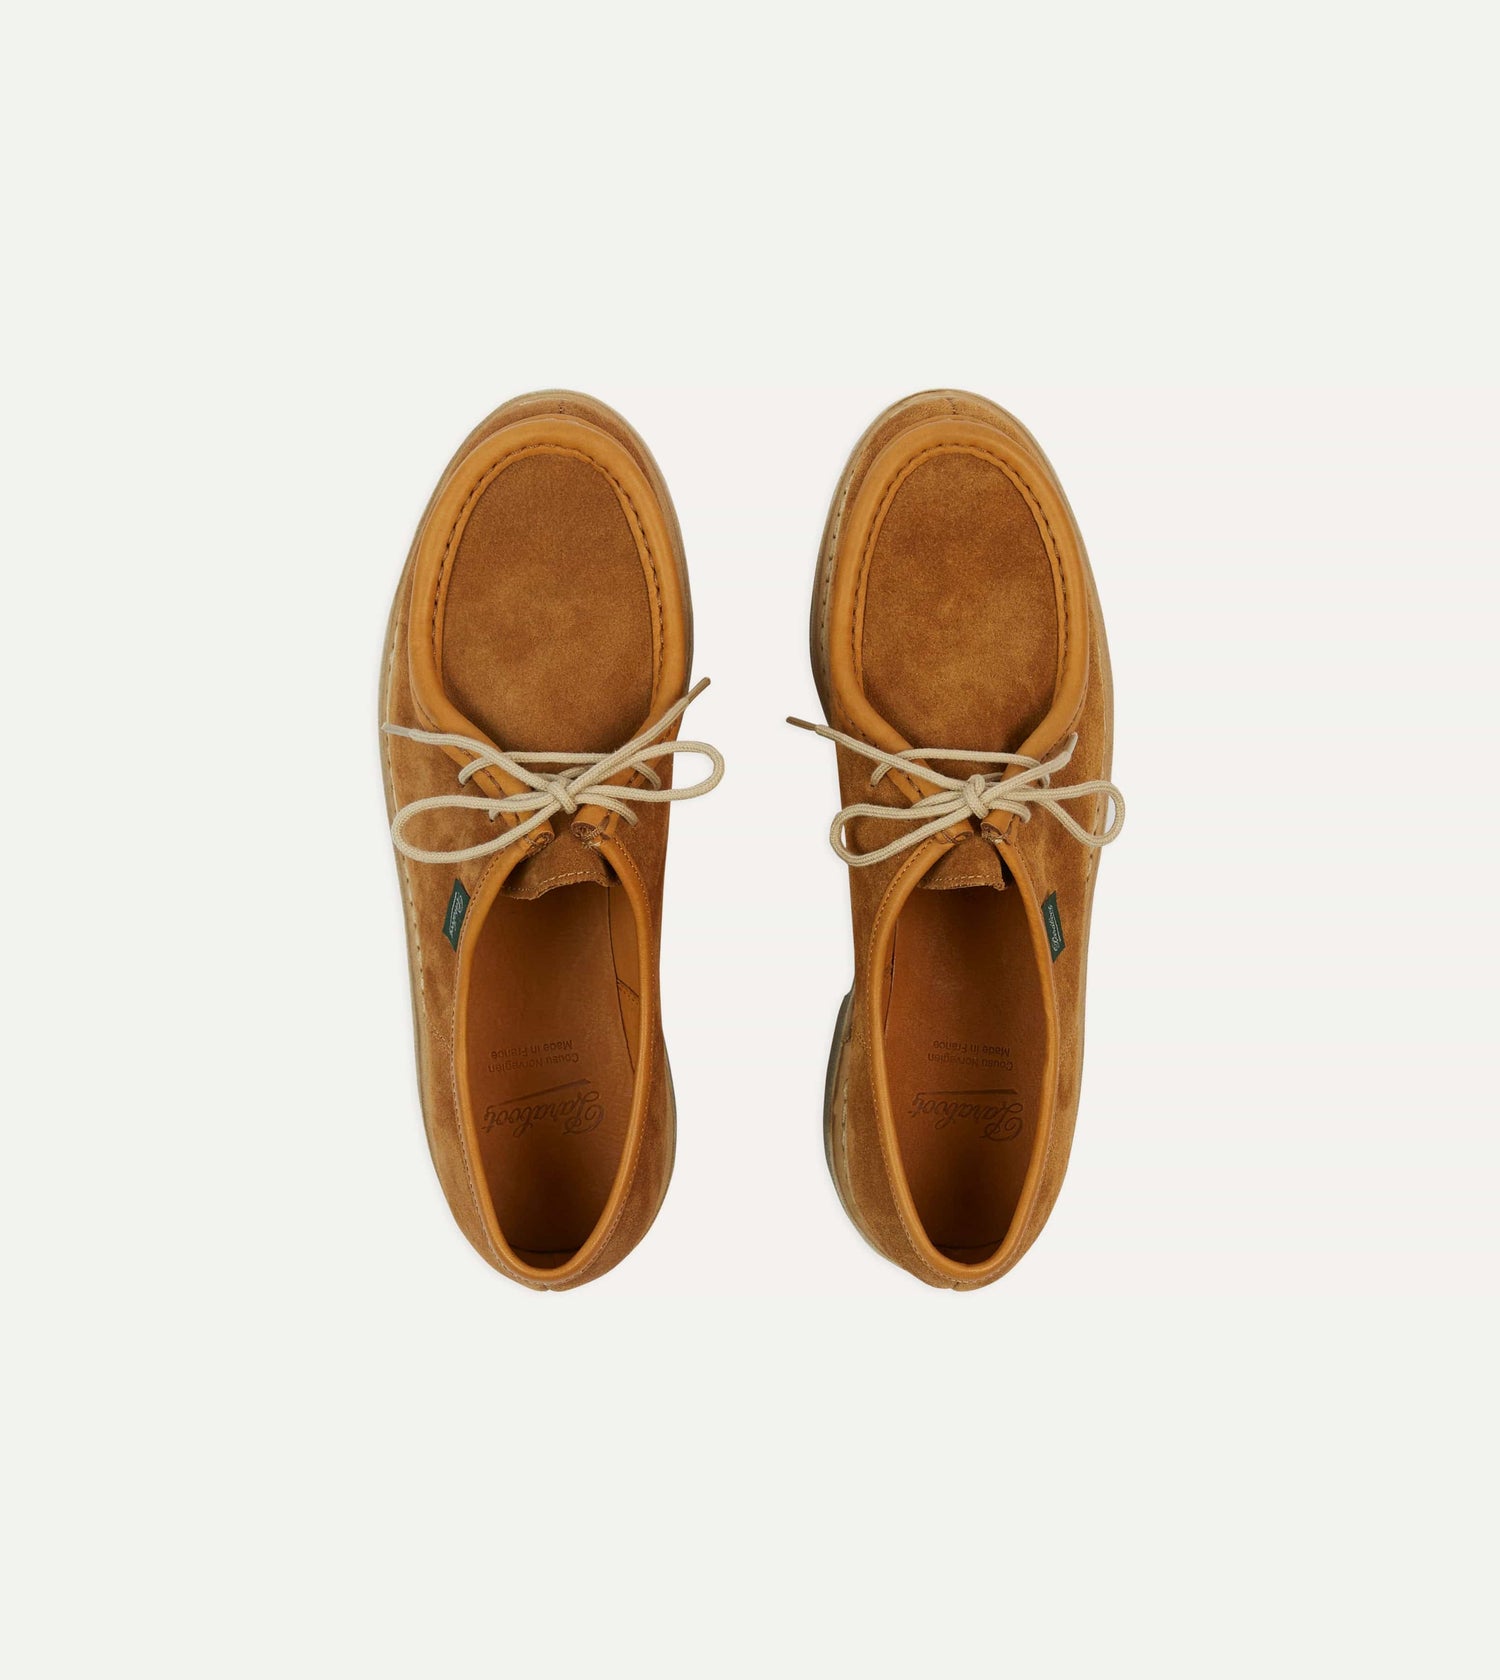 Paraboot Micka Whiskey Suede Derby Shoe